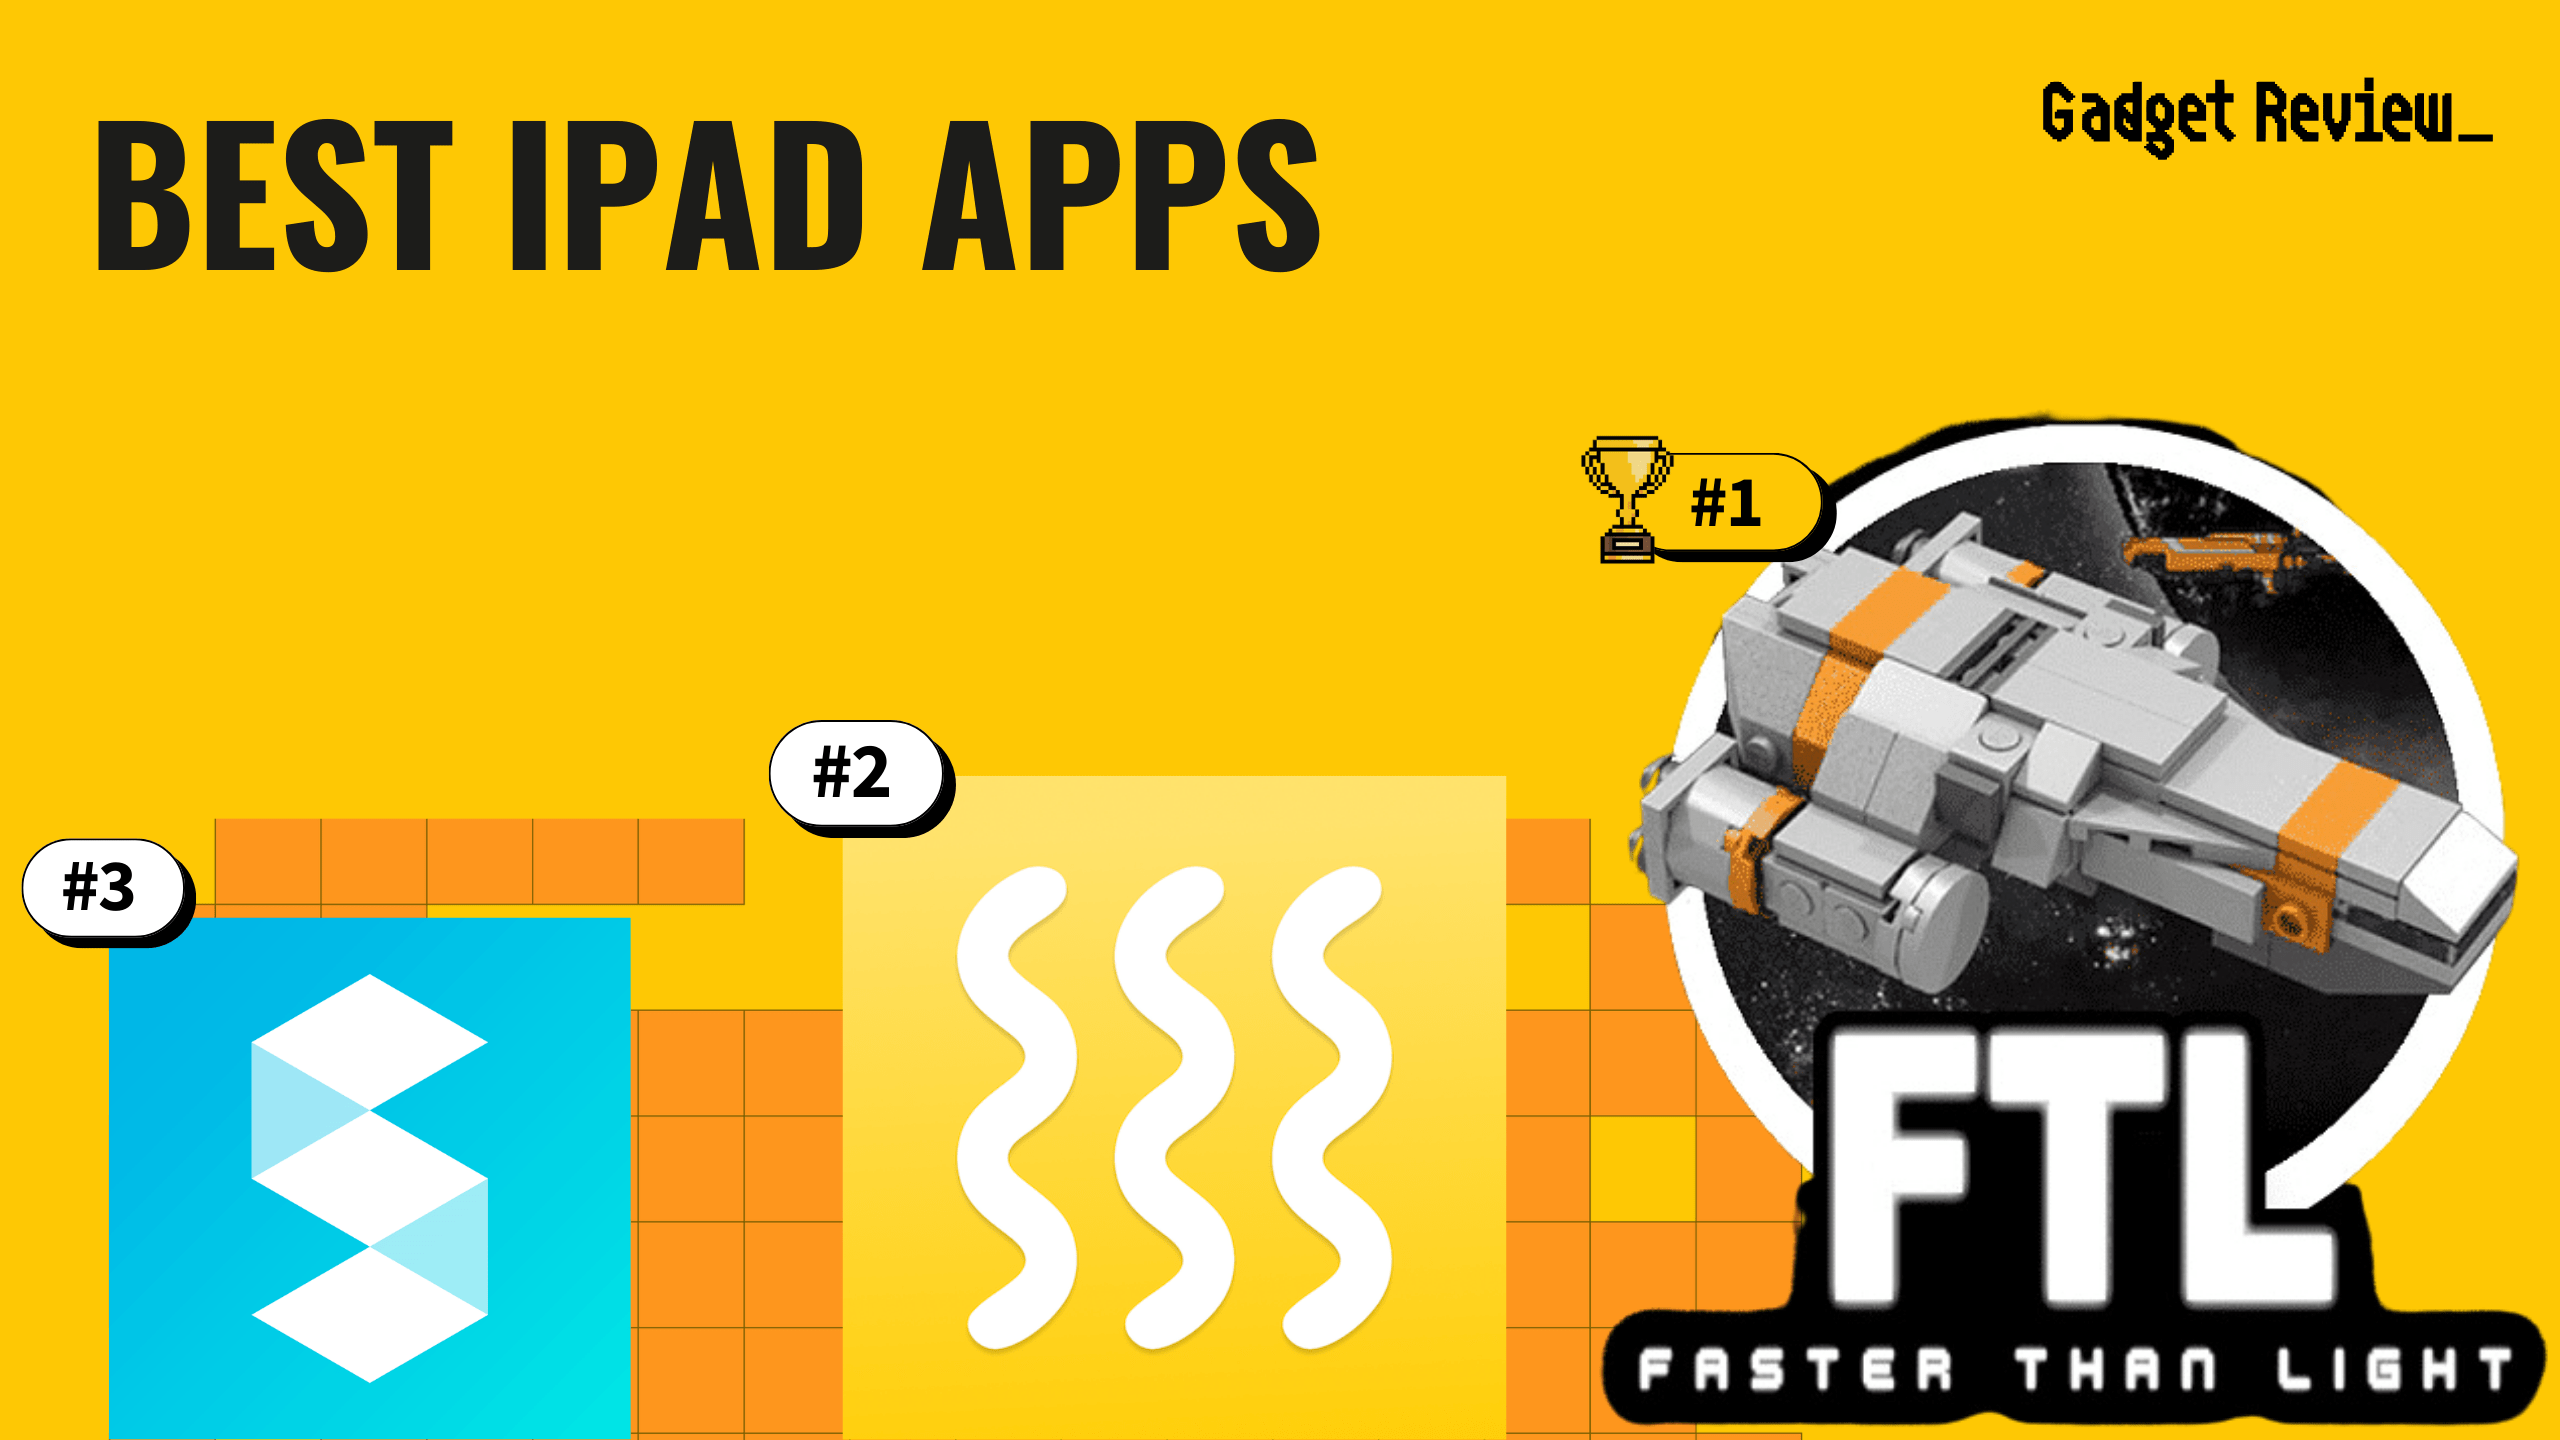 10 of the Best iPad Apps